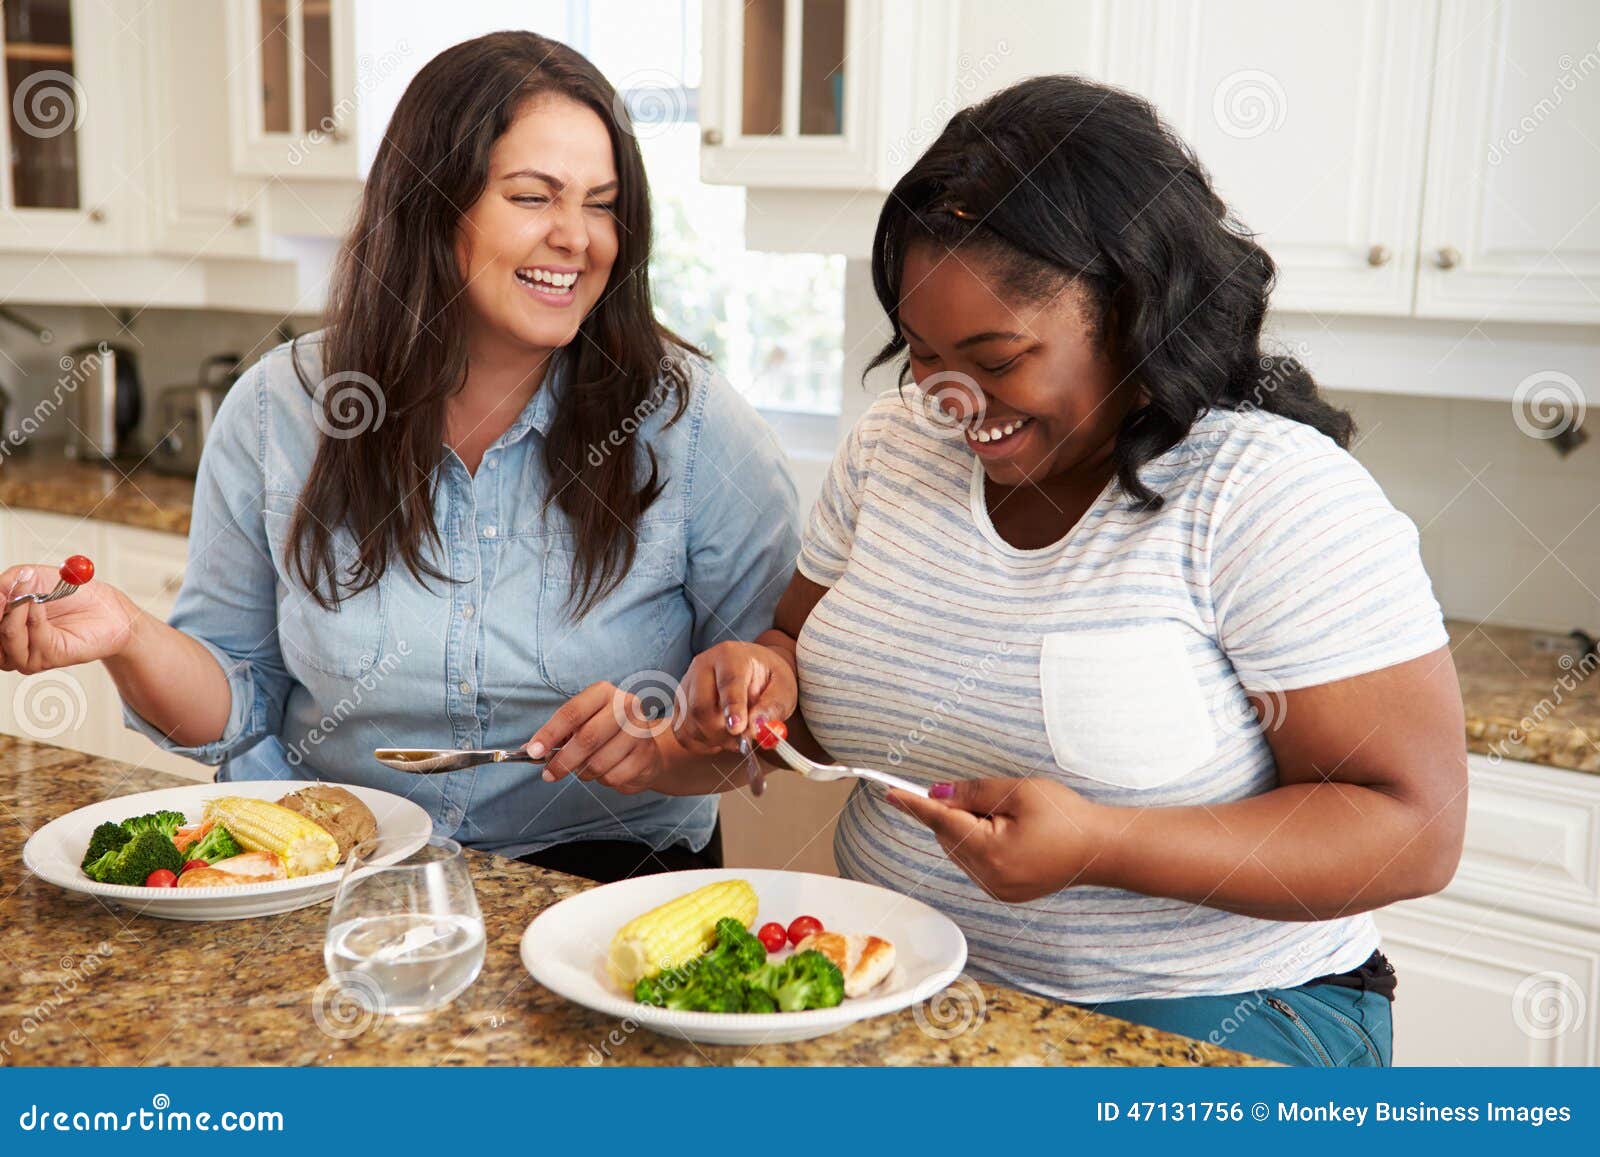 two overweight women on diet eating healthy meal in kitchen